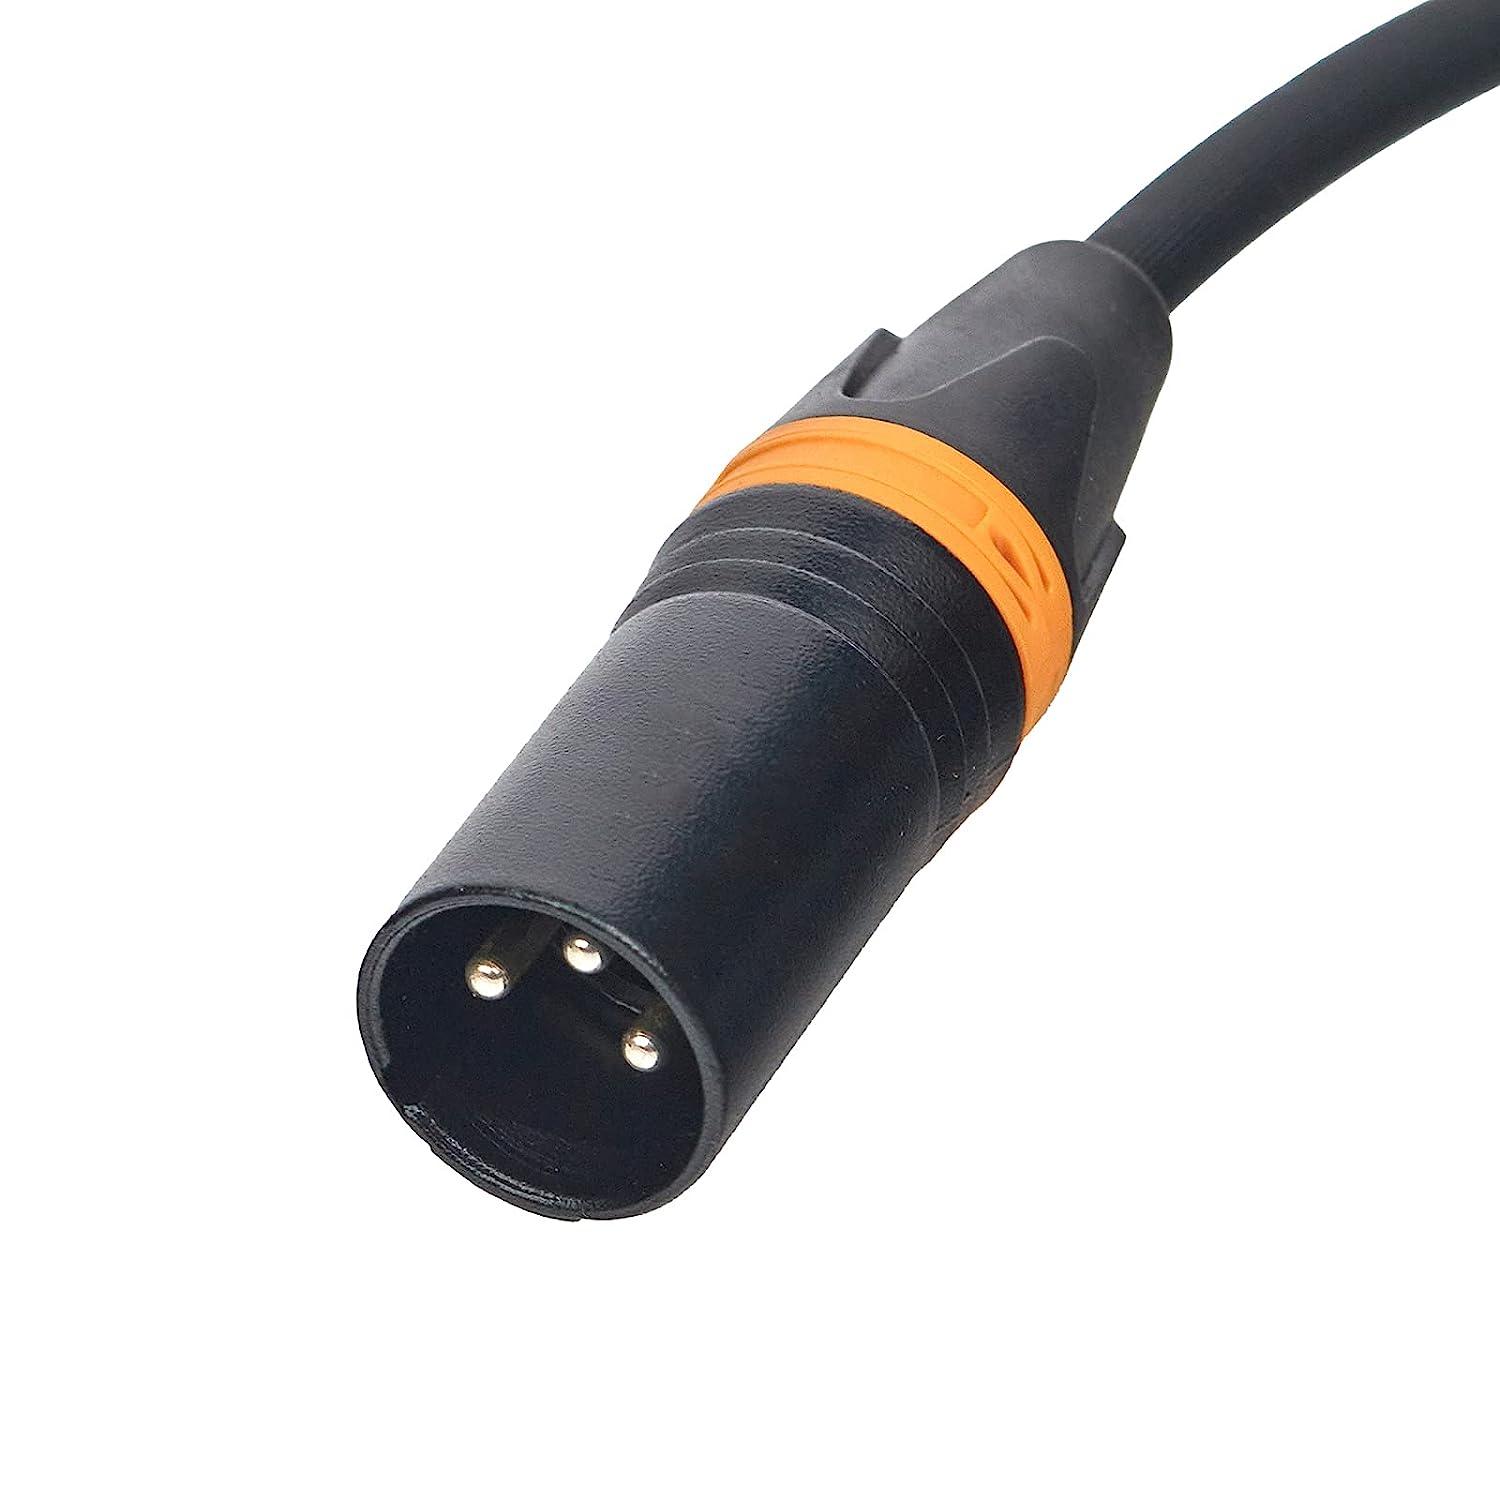 P38 TRS 6.3 mm to XLR Male3 pin 2 meters cable length (Balanced) - GADGET WAGON Audio & Video Cables , Connectors